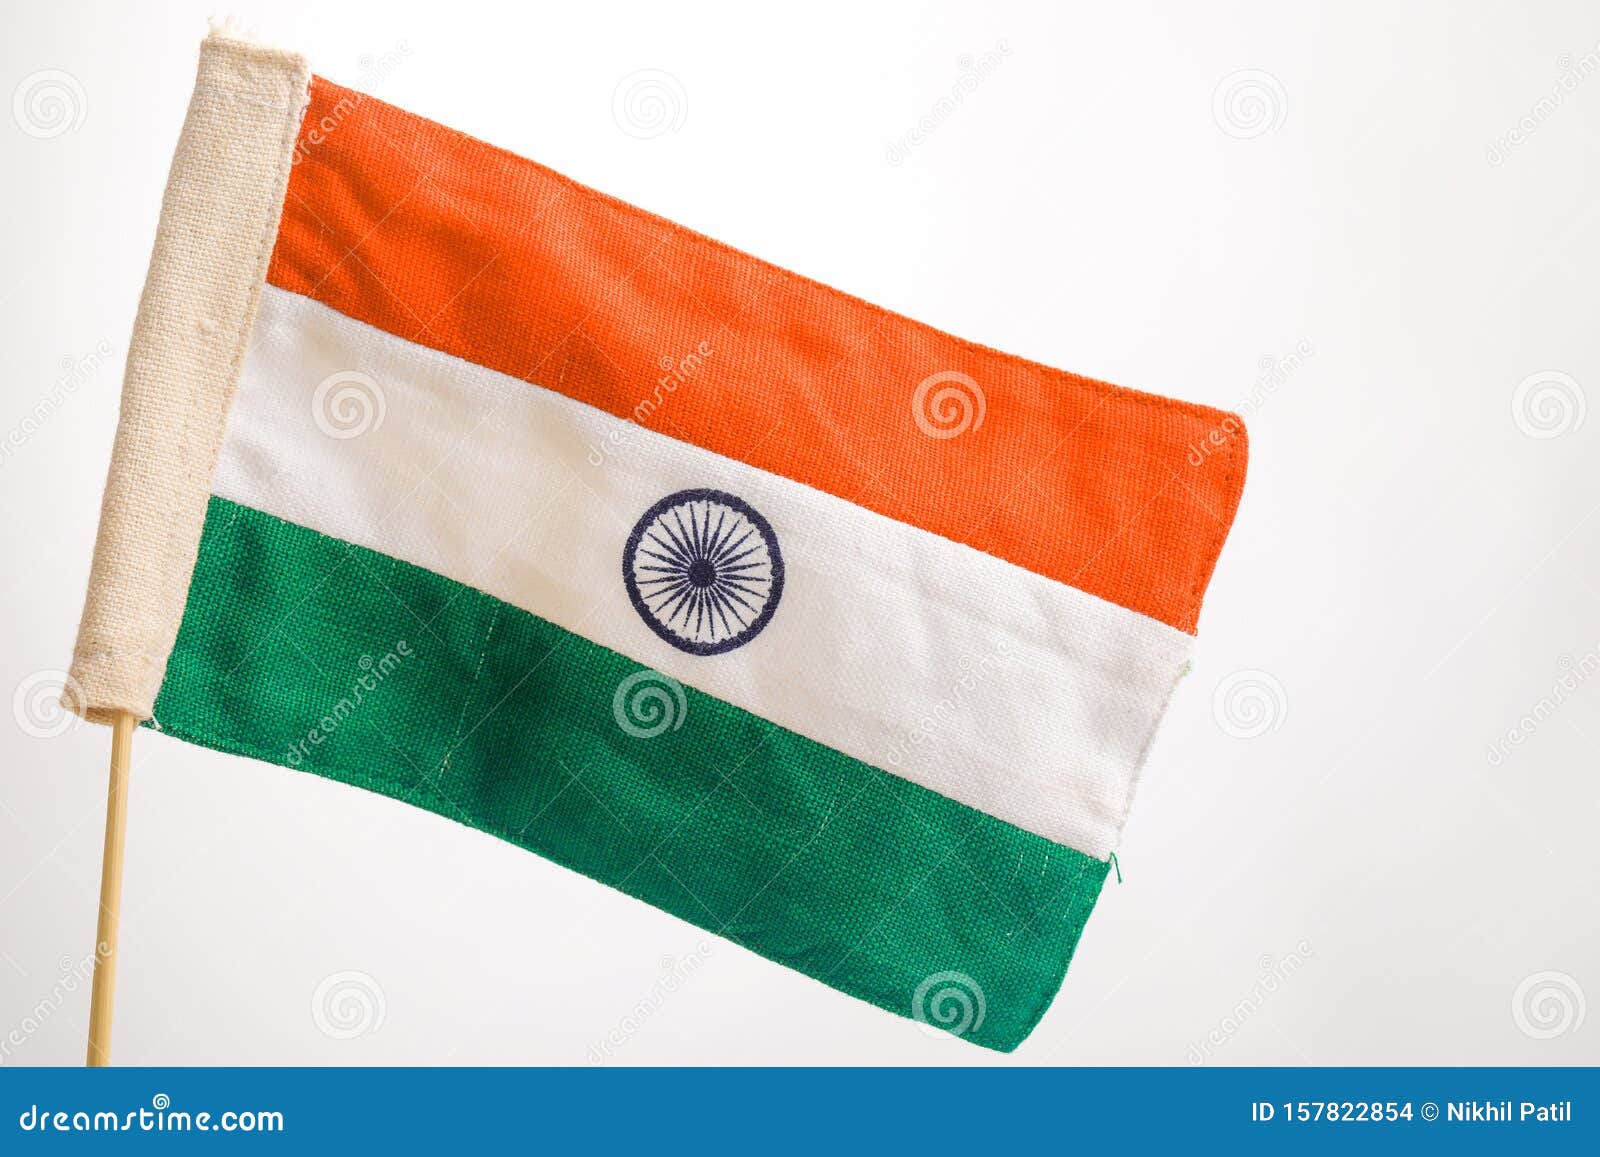 Indian Tricolor Flag Over White Background Stock Photo - Image of green,  15th: 157822854